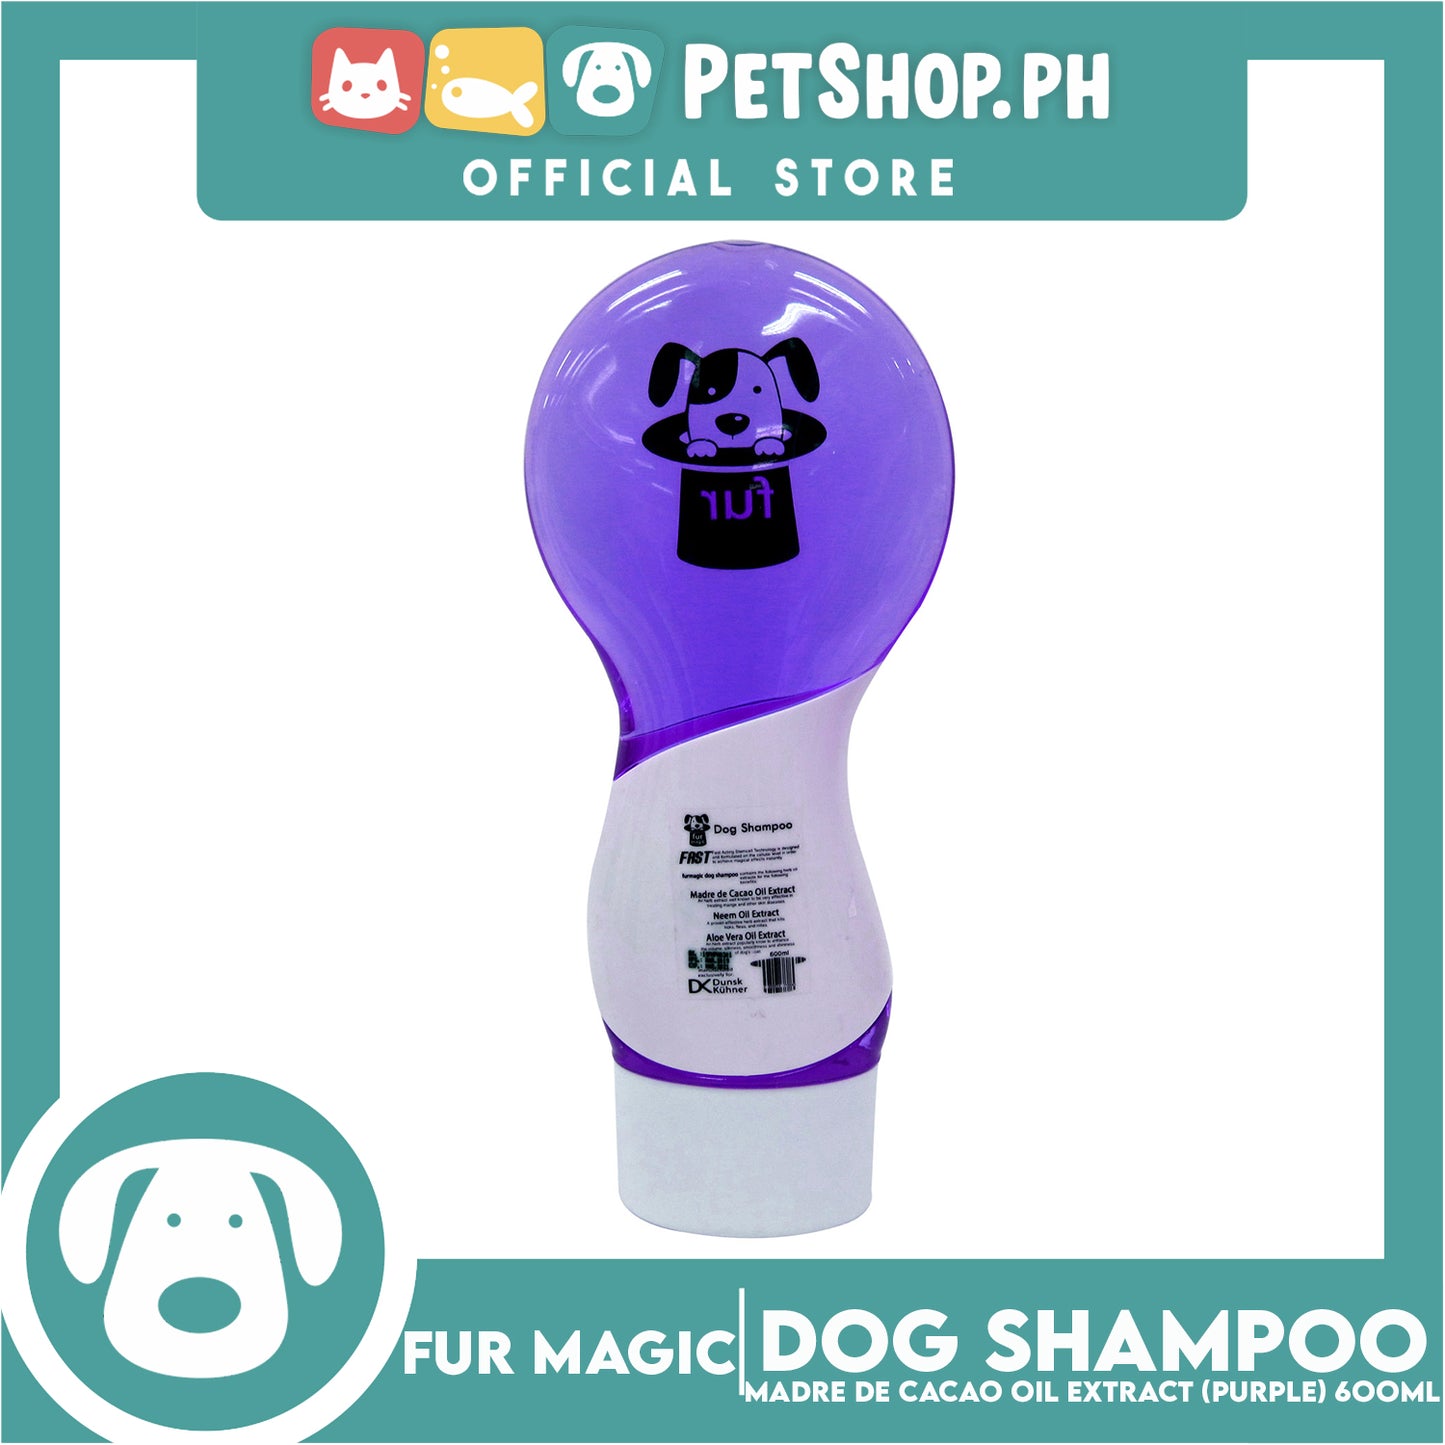 Fur magic with Fast Acting Stemcell Technology (Violet) 600ml Dog Shampoo